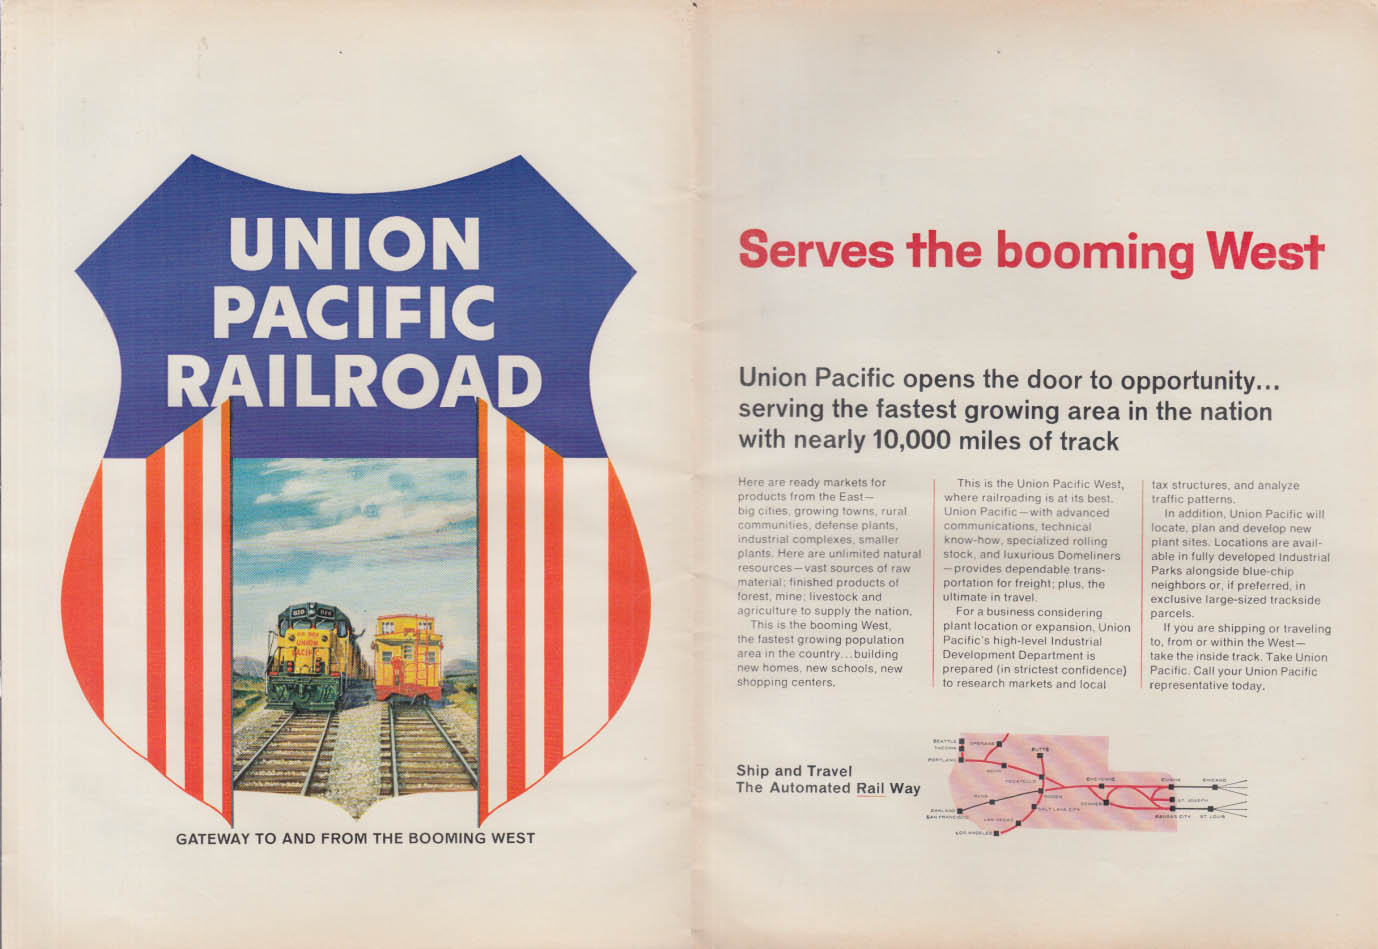 Serves the booming west - Union Pacific Railroad ad 1966 var